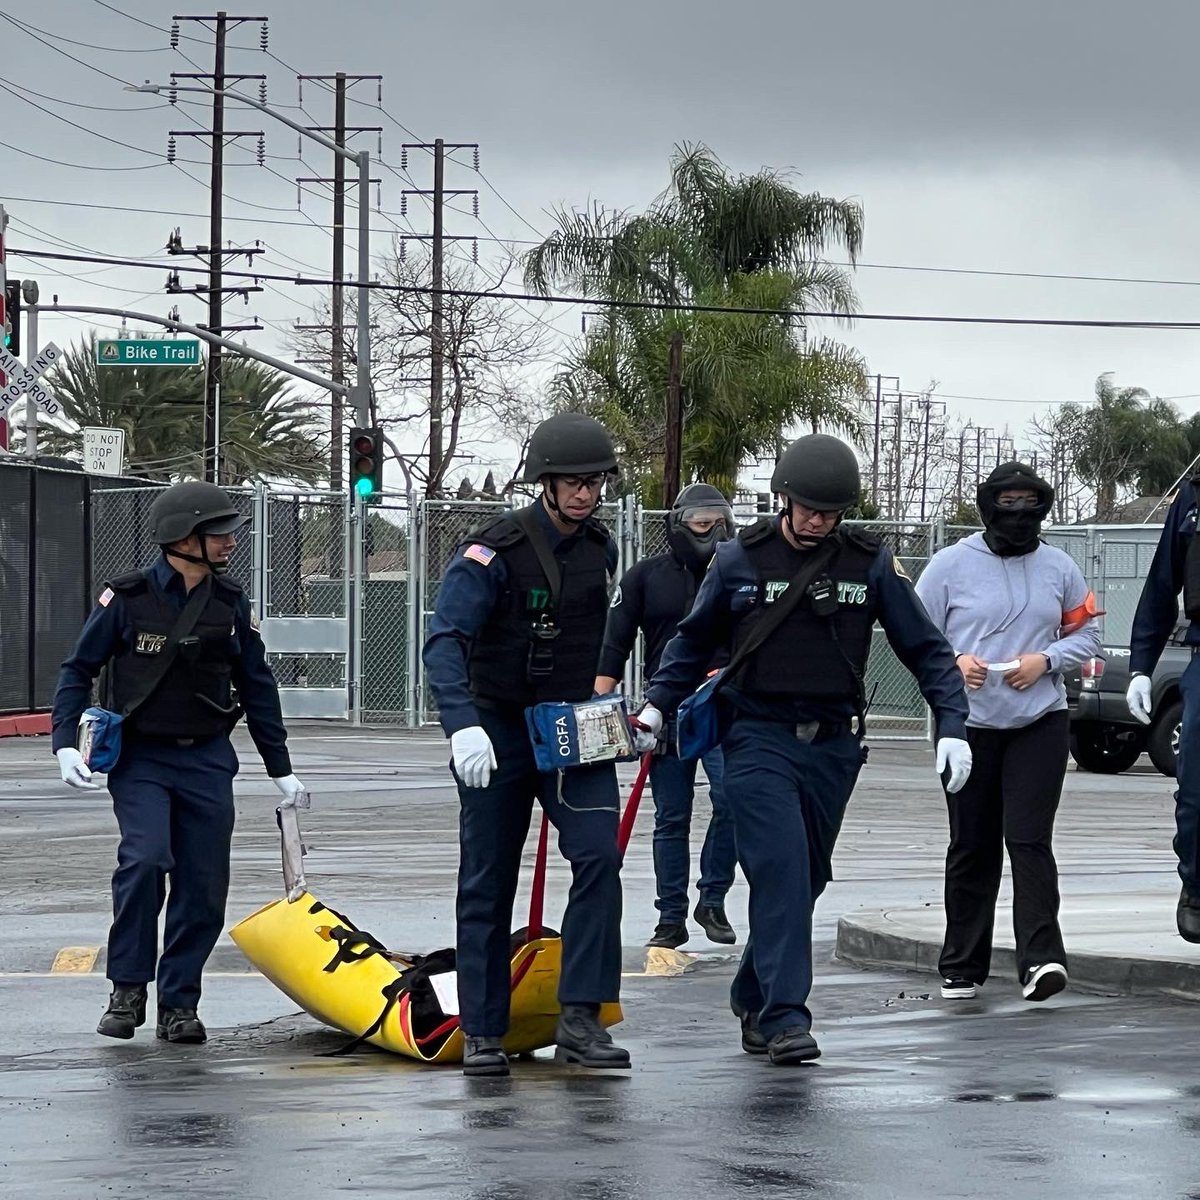 Active shooter incident. Firefighters and firefighter paramedics were able to work with officers to gain access, initiate life-saving treatment of injured victims, and provide for rescue to a safe area where they could receive further care from awaiting crews